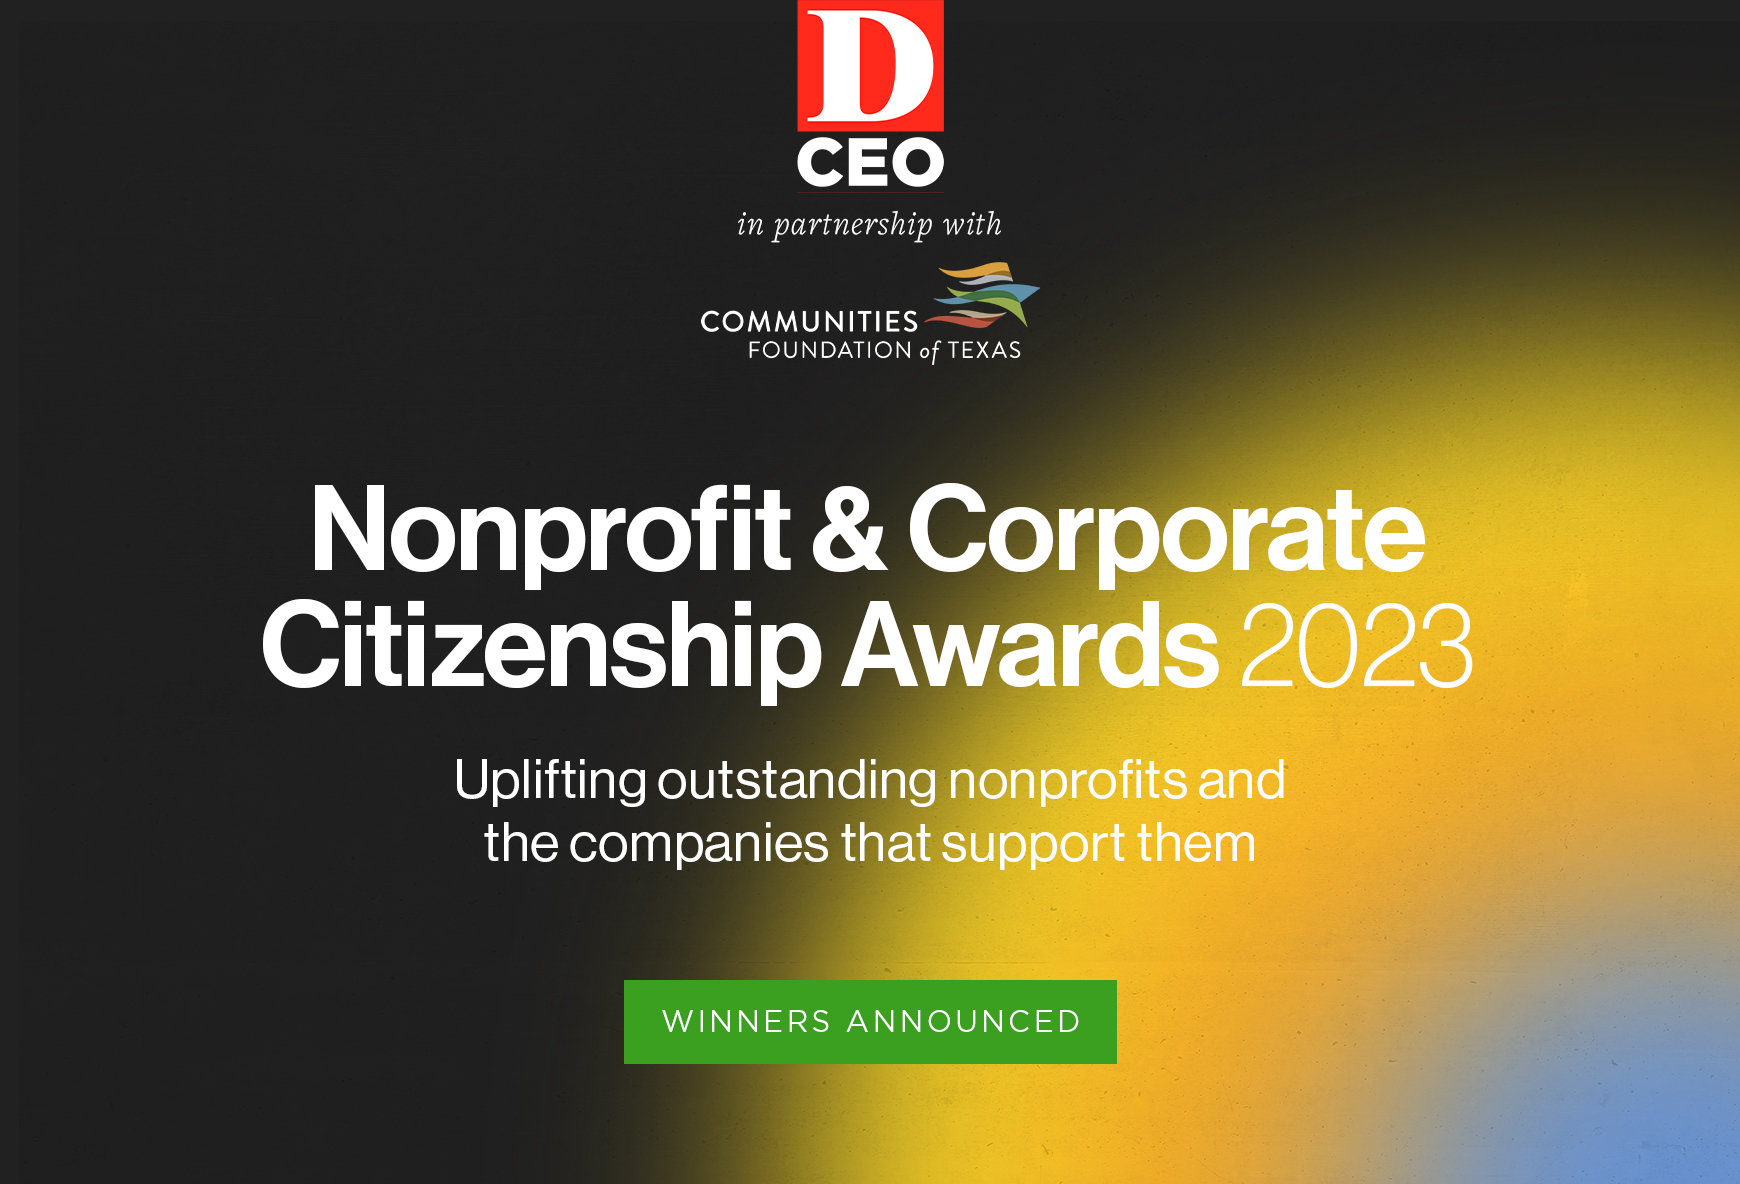 Winners Announced D CEOs 2023 Nonprofit and Corporate Citizenship Awards